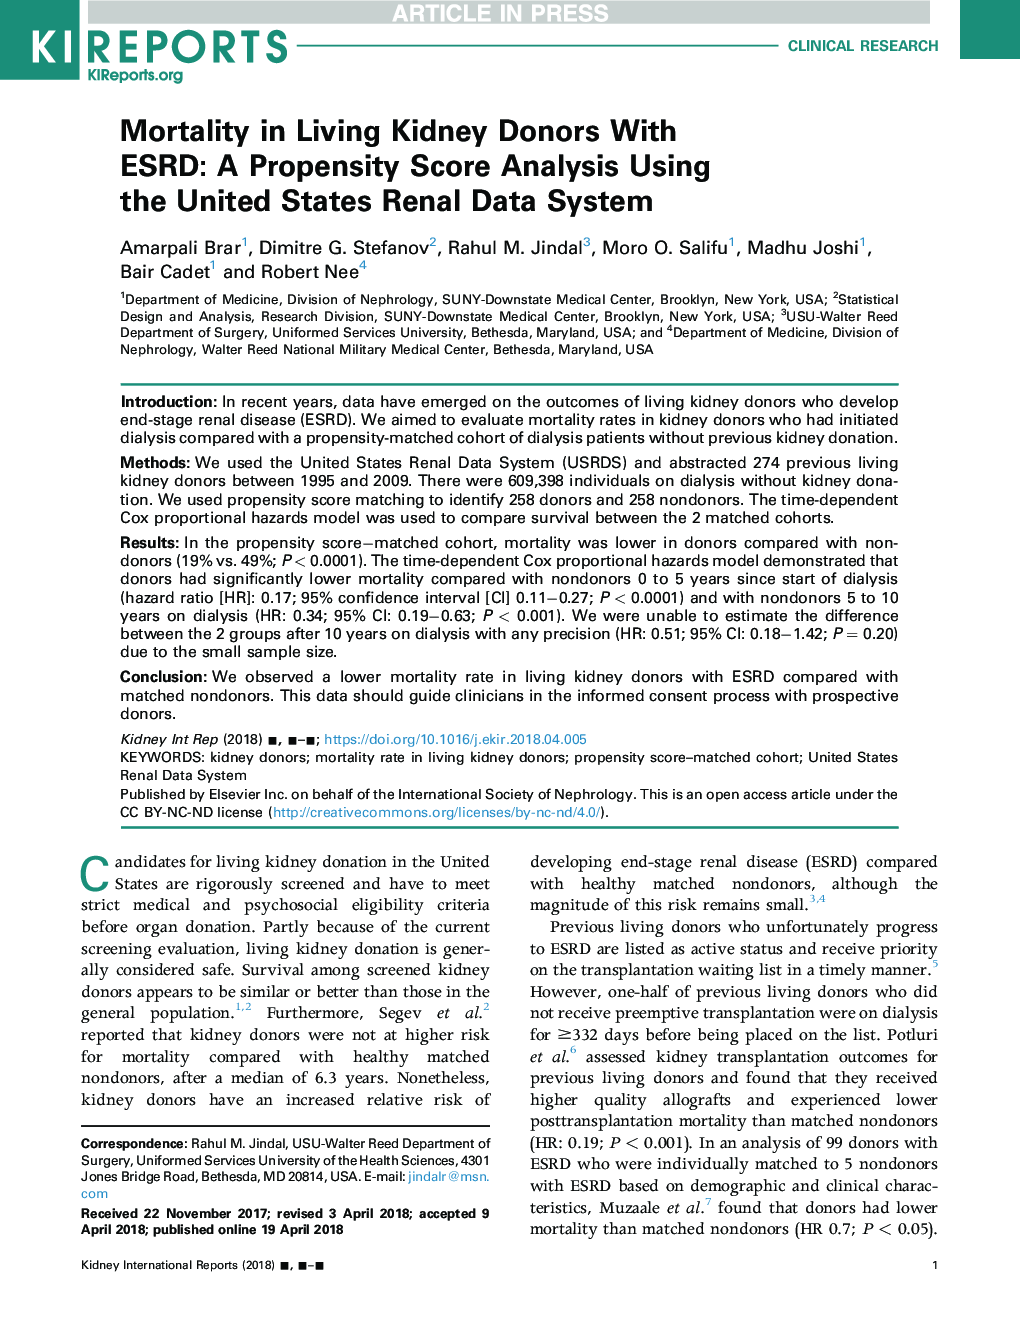 Mortality in Living Kidney Donors With ESRD: A Propensity Score Analysis Using the United States Renal Data System